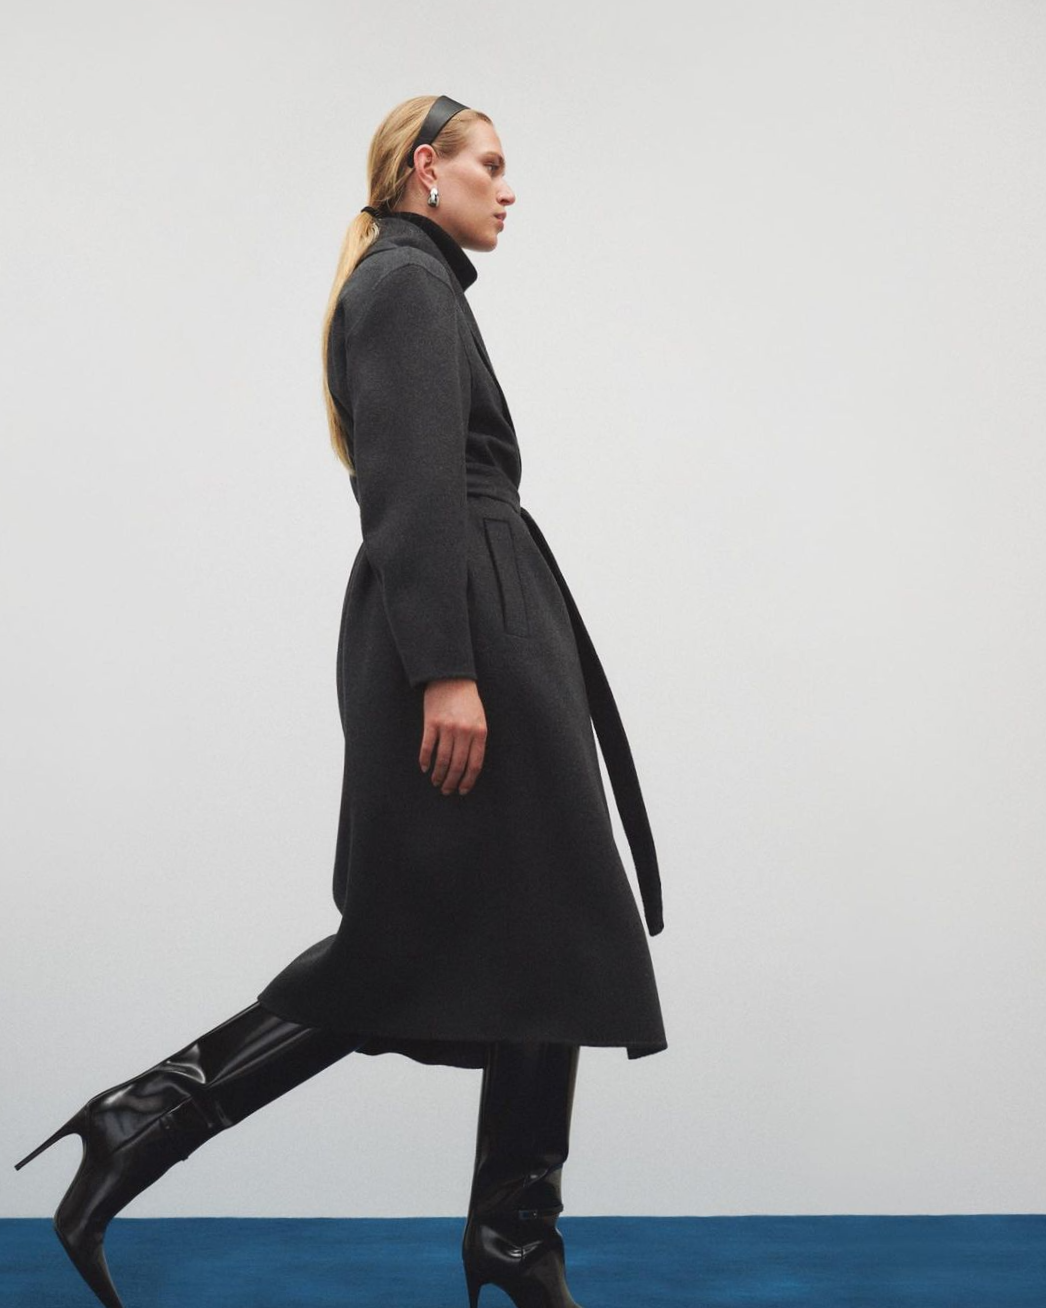 model wearing long black coat with tall black leather boots